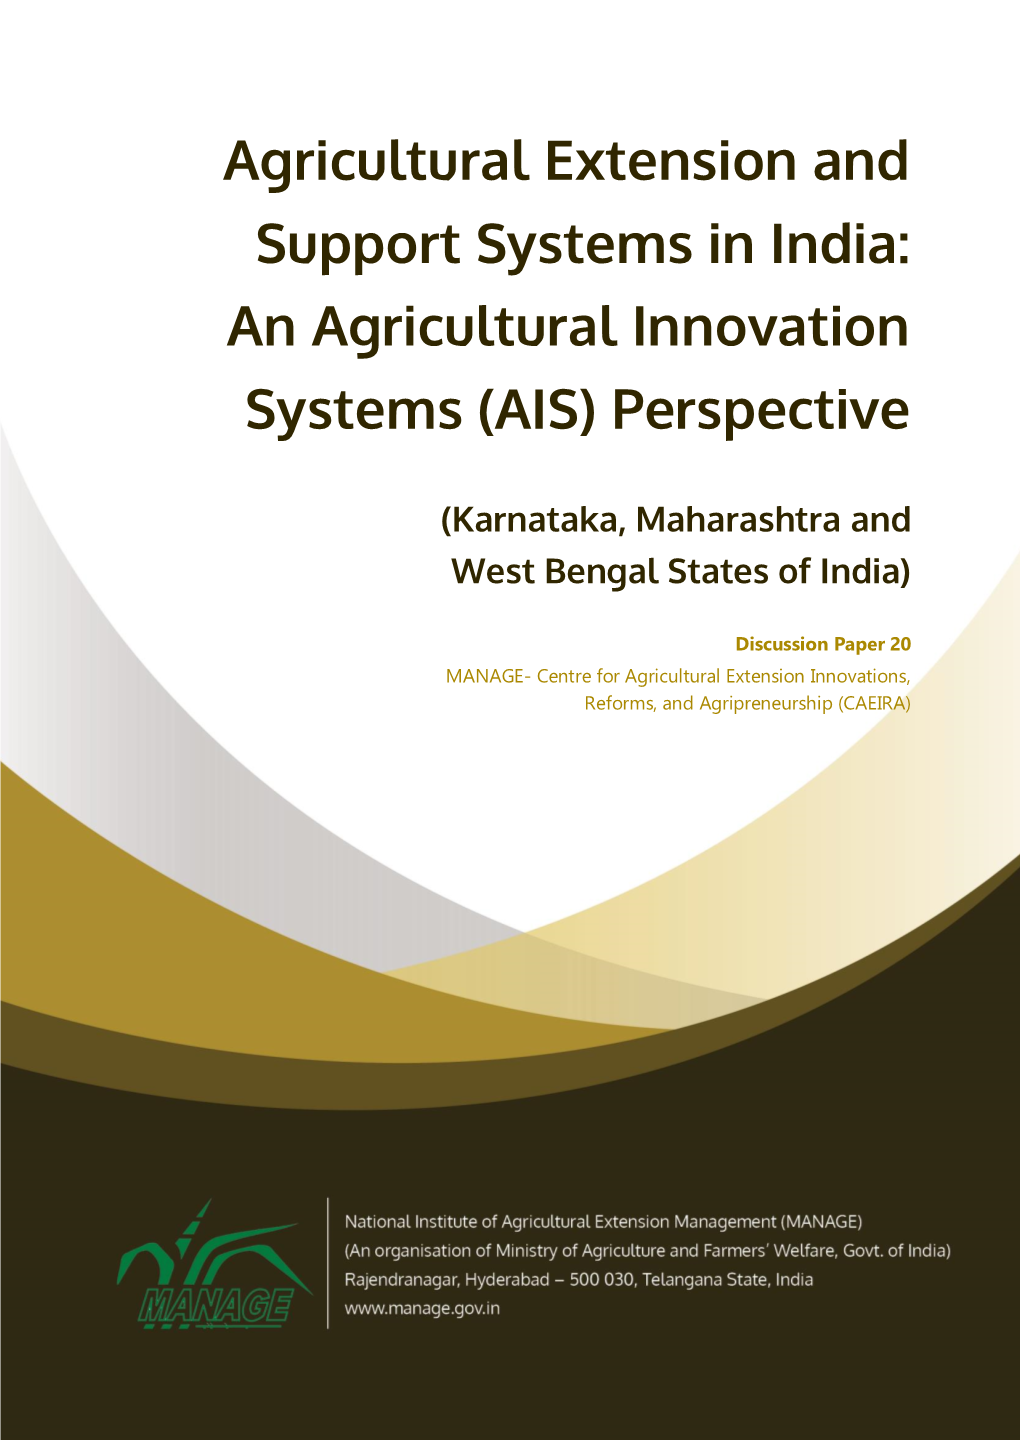 Agricultural Extension and Support Systems in India: an Agricultural Innovation Systems (AIS) Perspective